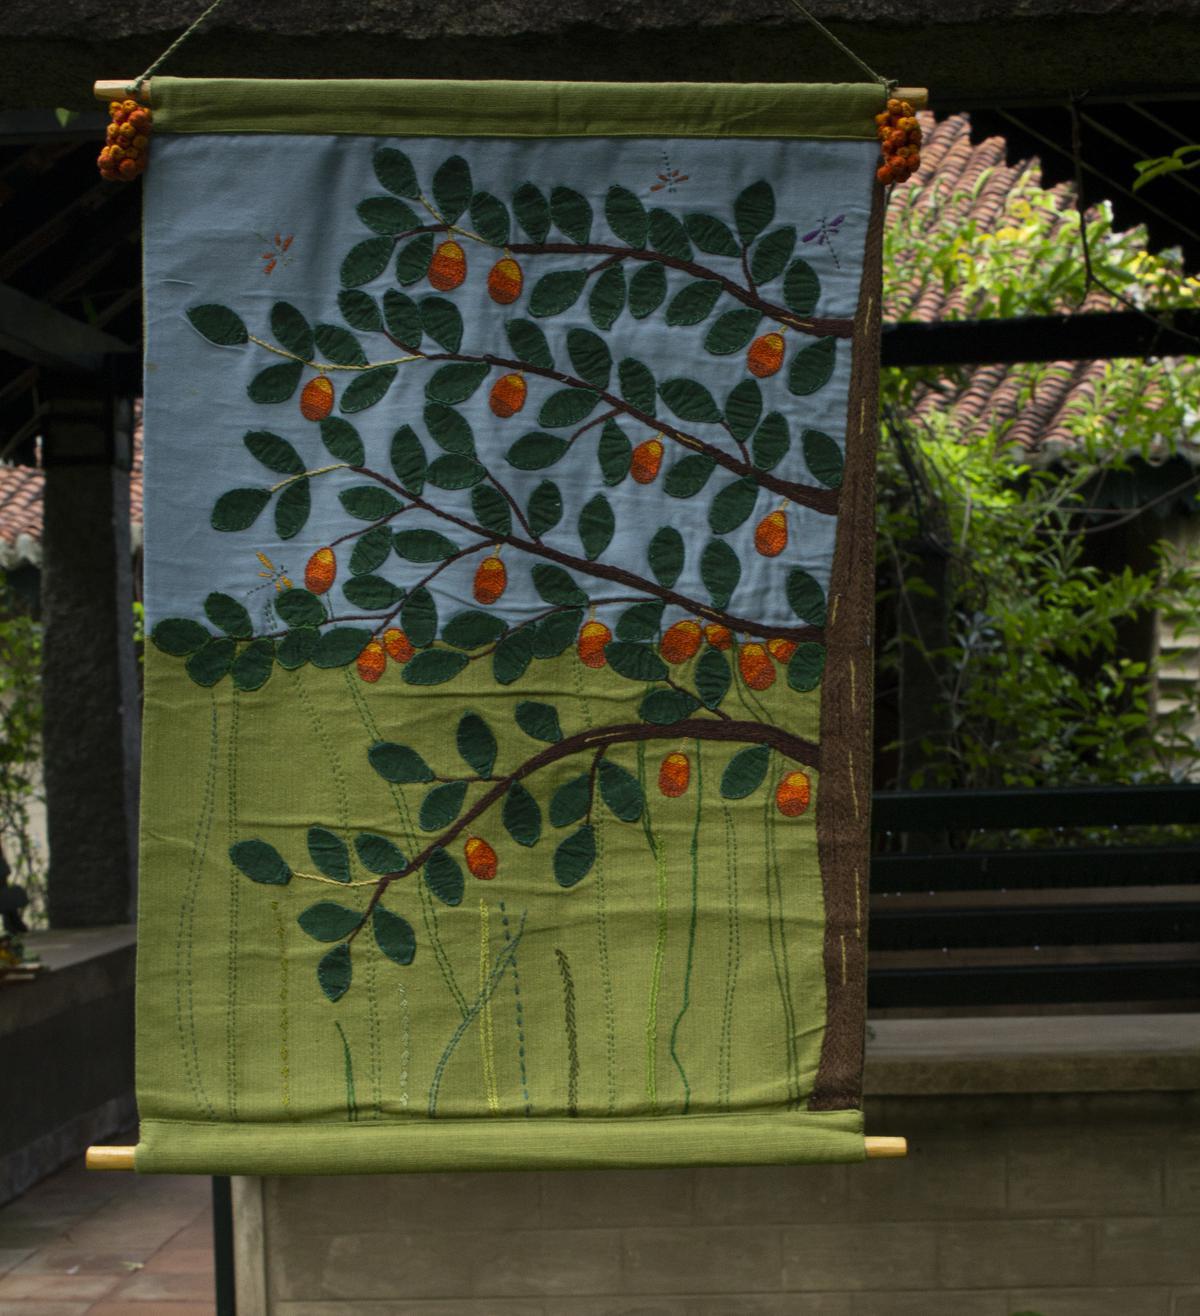 Textile art depicting motifs from Nature, crafted by the artisans at Porgai